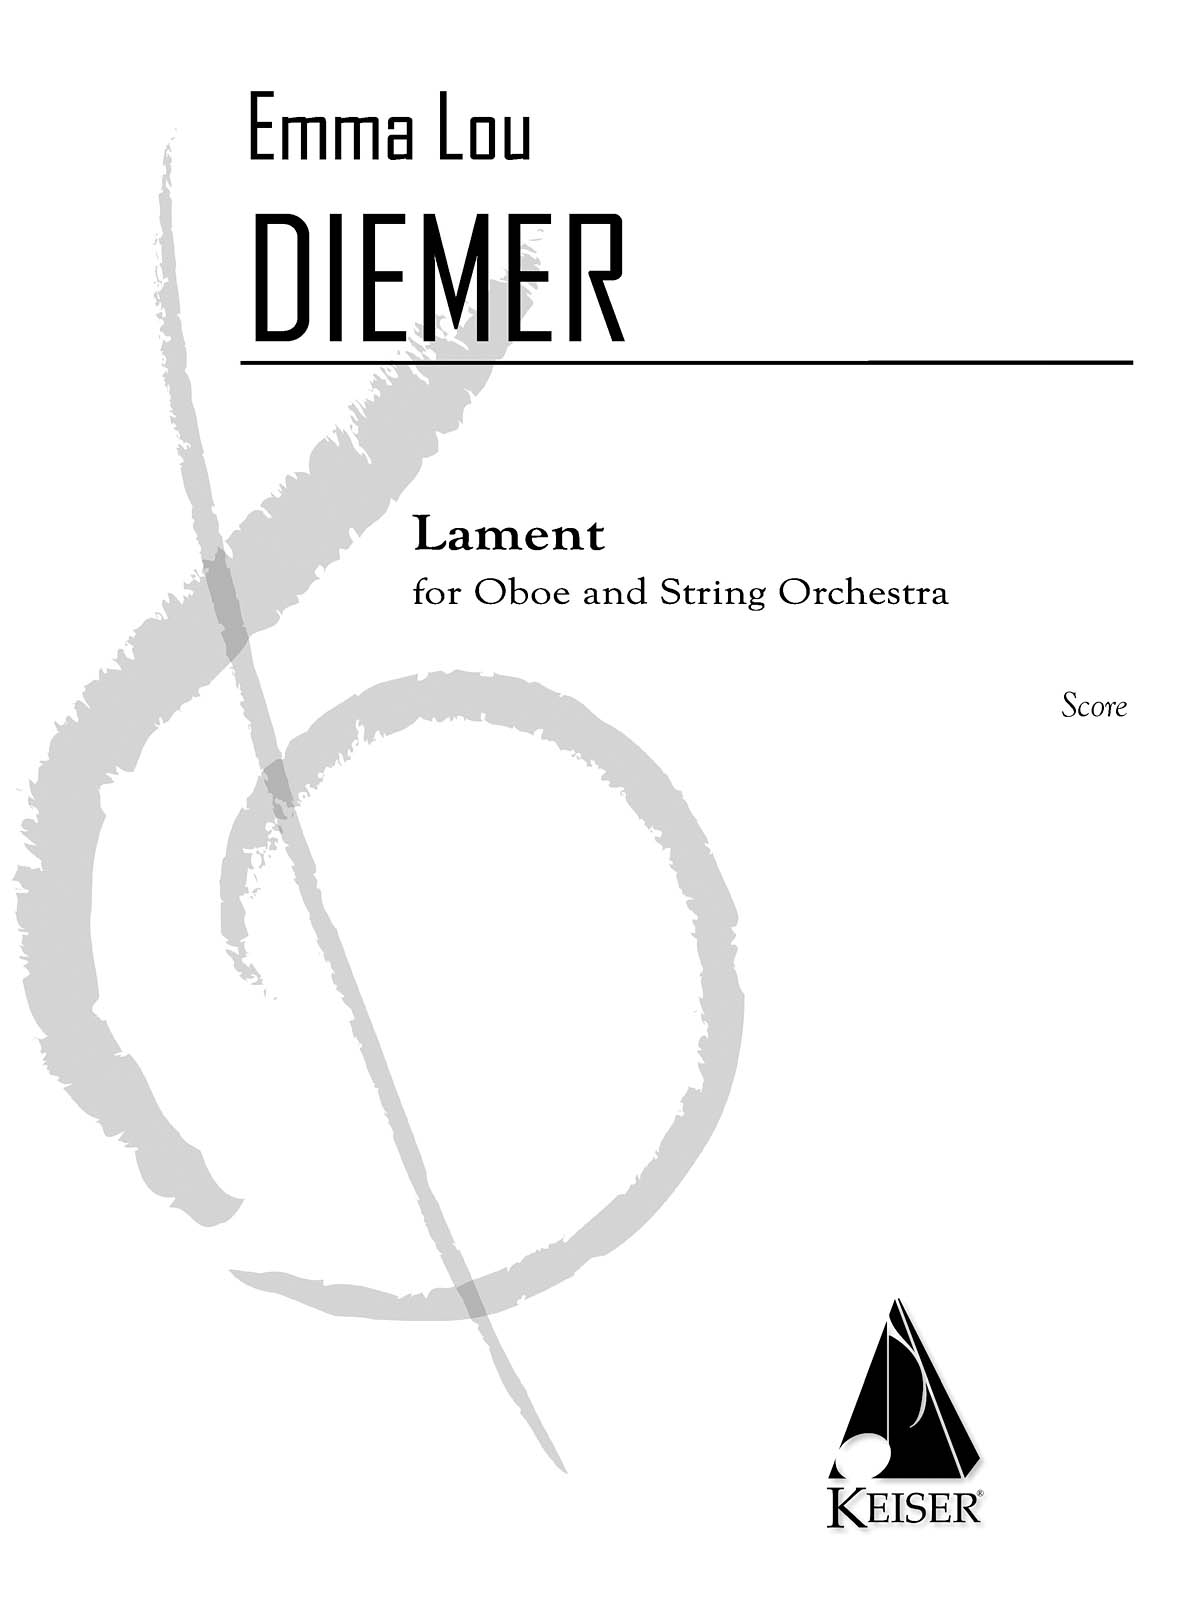 Emma Lou Diemer: Lament for Oboe and String Orchestra - Full Score: String